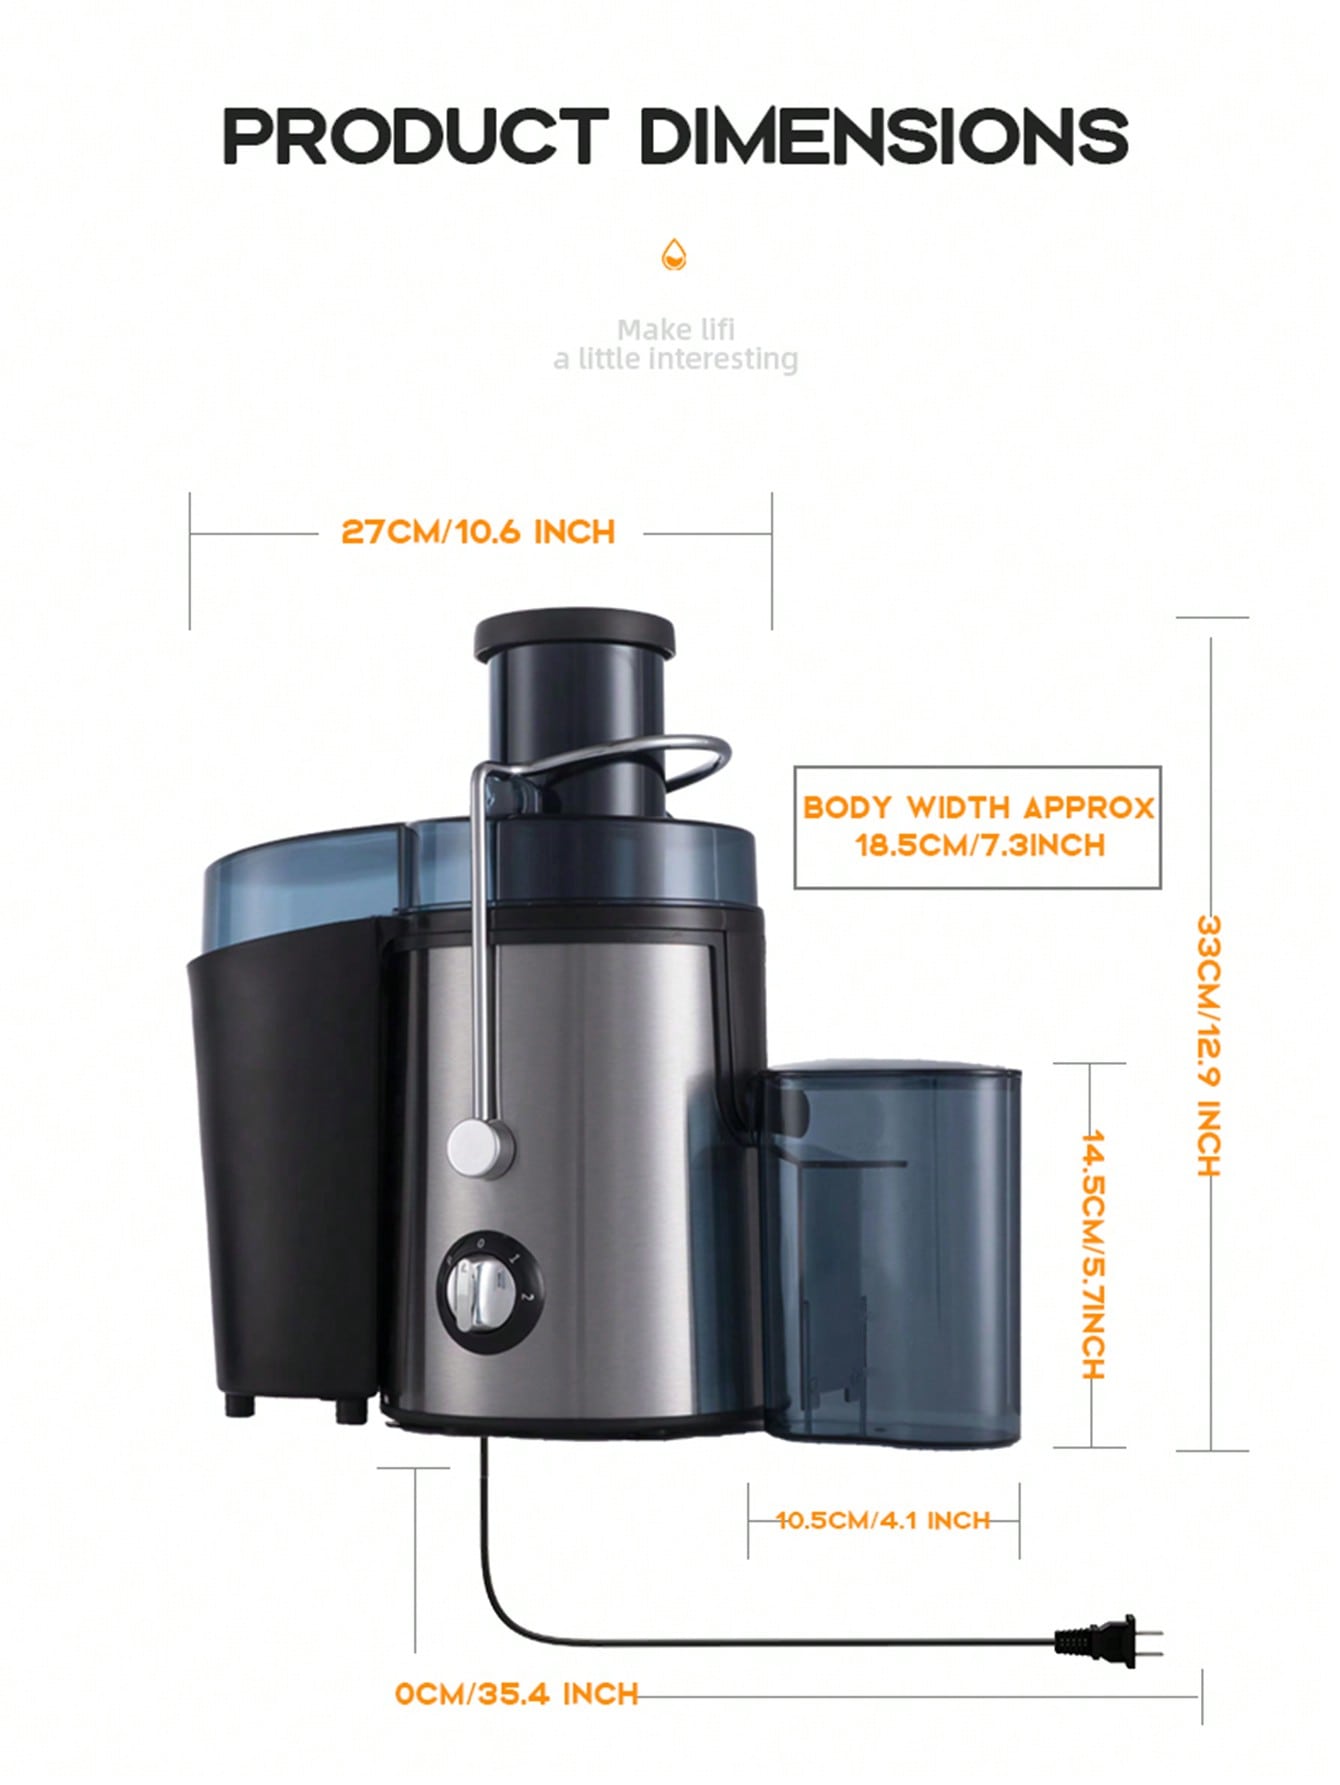 1pc Uk Standard Easy-clean Juicer, Pulp Separation Design, 400w High Power, 65cm Wide Feeder Chute, 450ml Juice Cup, Free Cleaning Brush Included--3